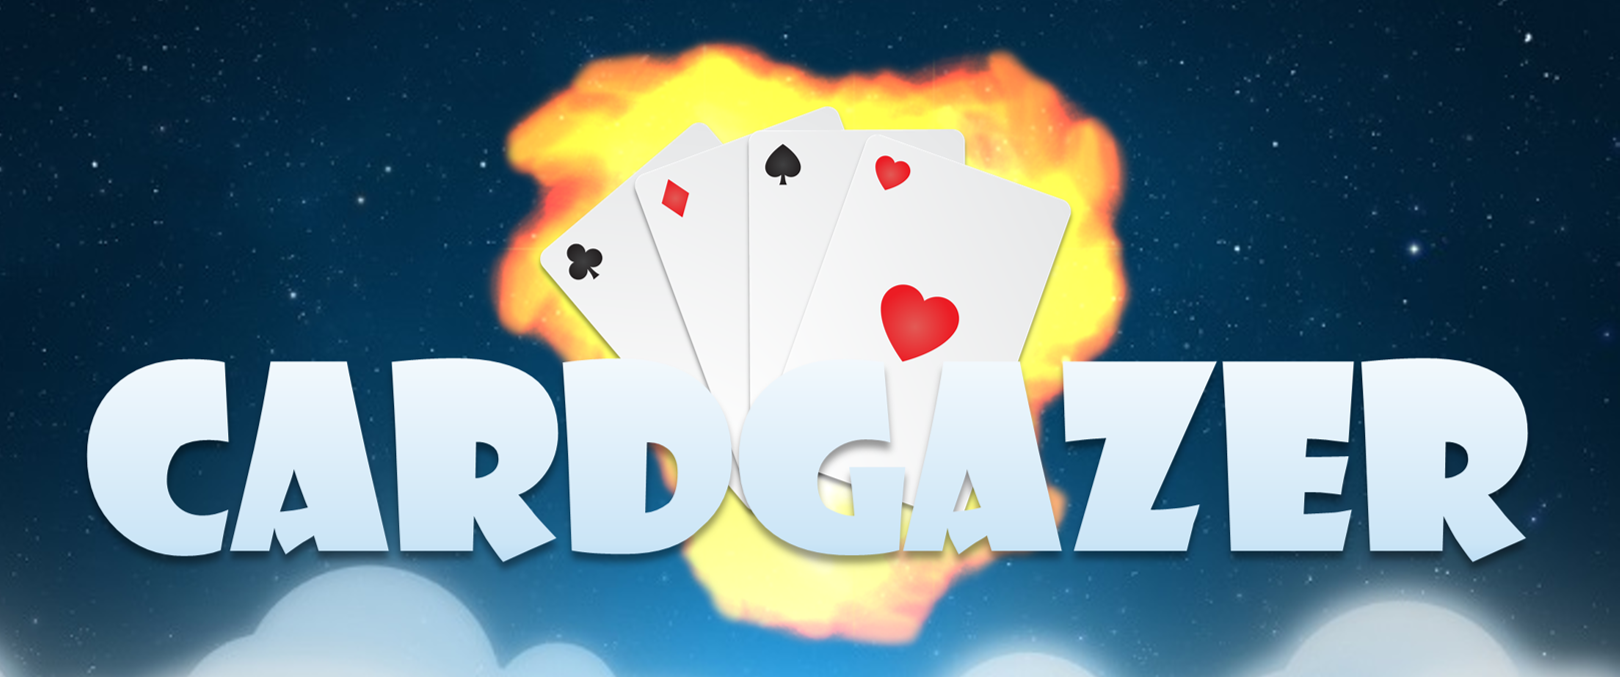 “Visualize” playing cards with your mind!Cardgazer